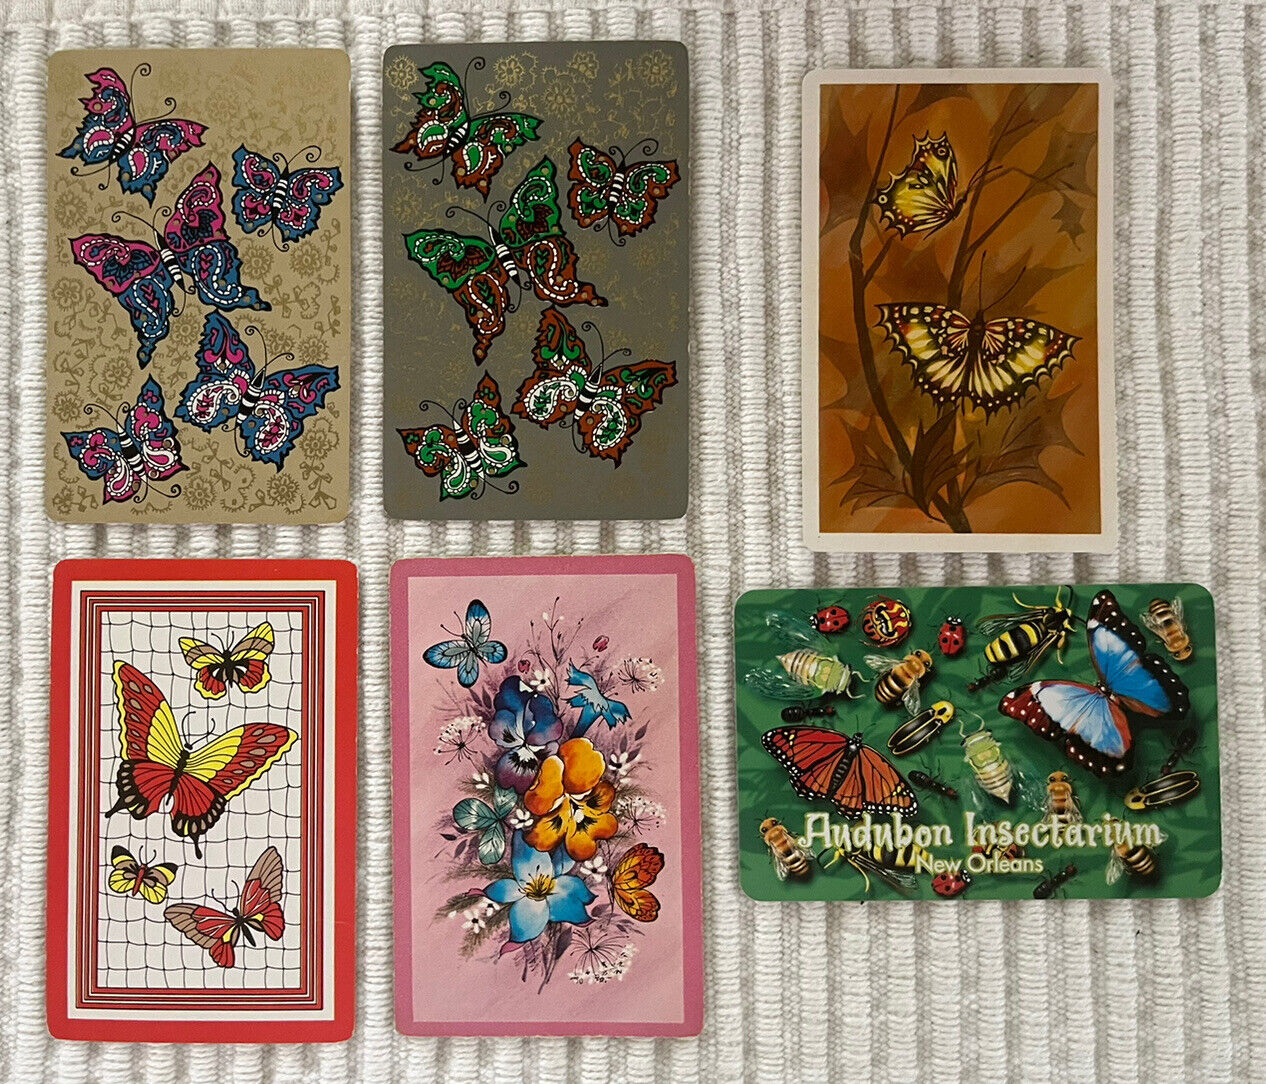 6 Vintage Playing Cards ~ Butterflies & Insects ~Audubon Insectarium/New Orleans